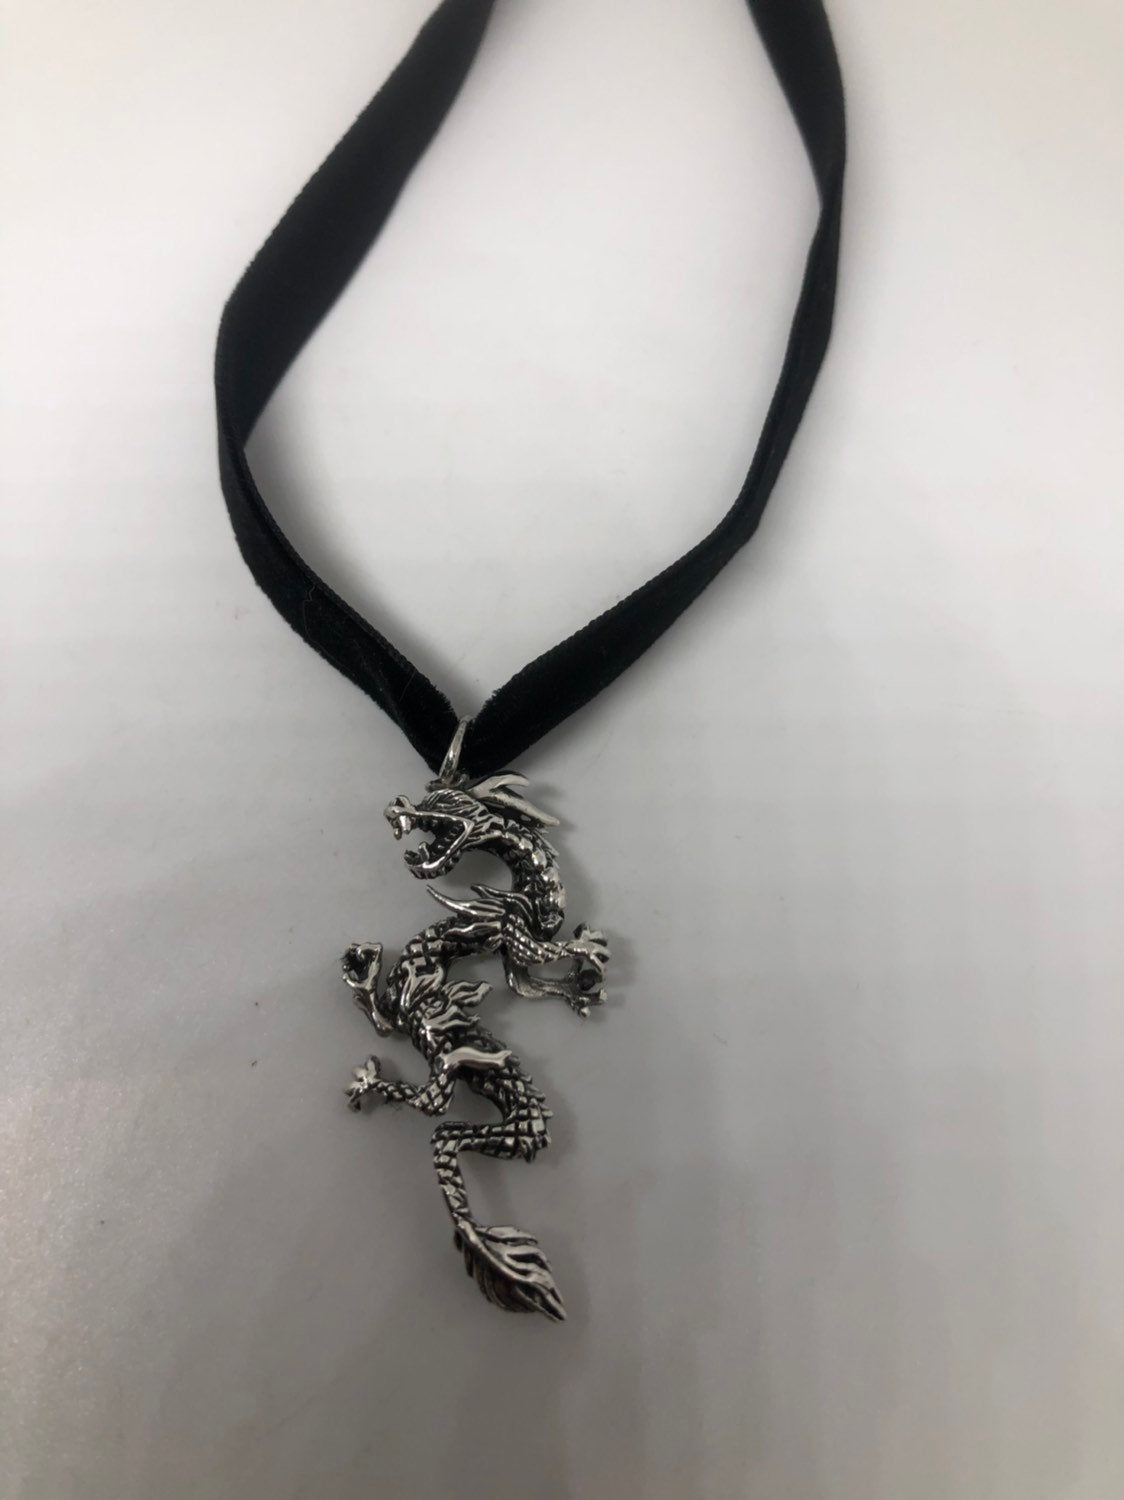 Vintage Handmade Sterling Silver 925 Gothic Dragon Necklace